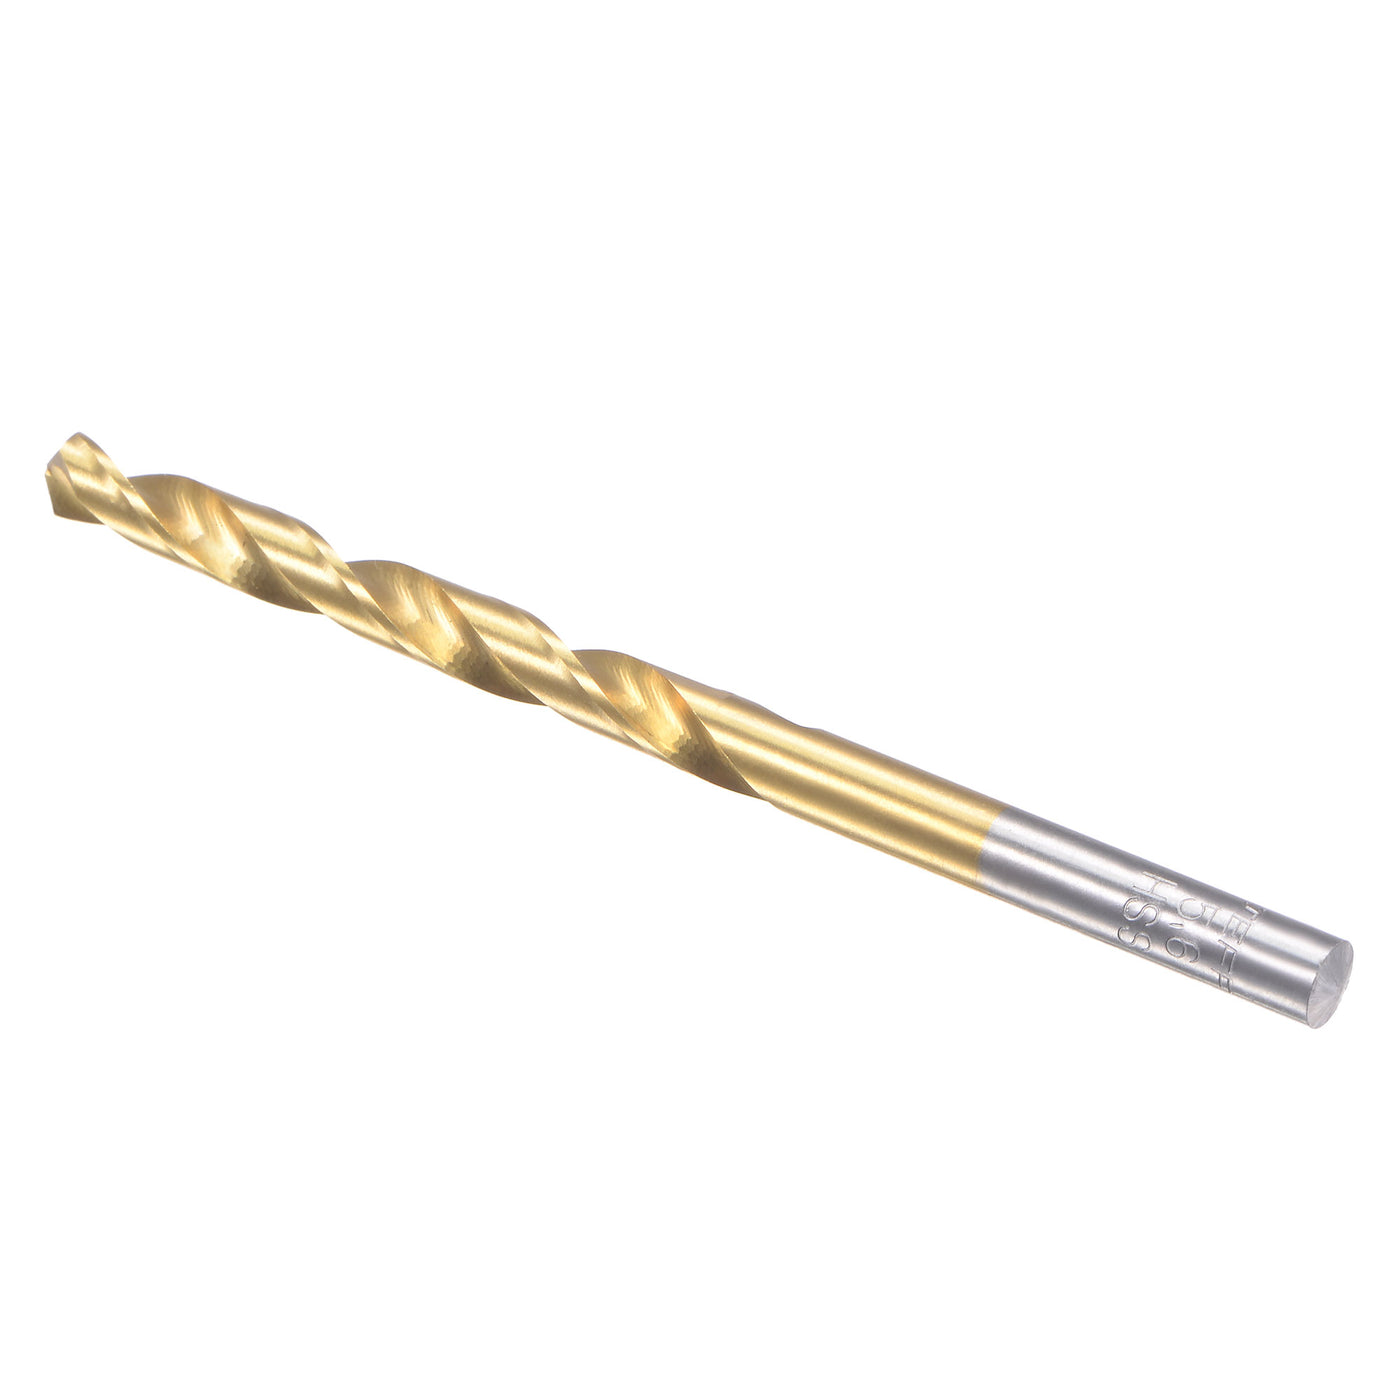 uxcell Uxcell High Speed Steel Twist Drill Bit 5.6mm Fully Ground Titanium Coated 2 Pcs